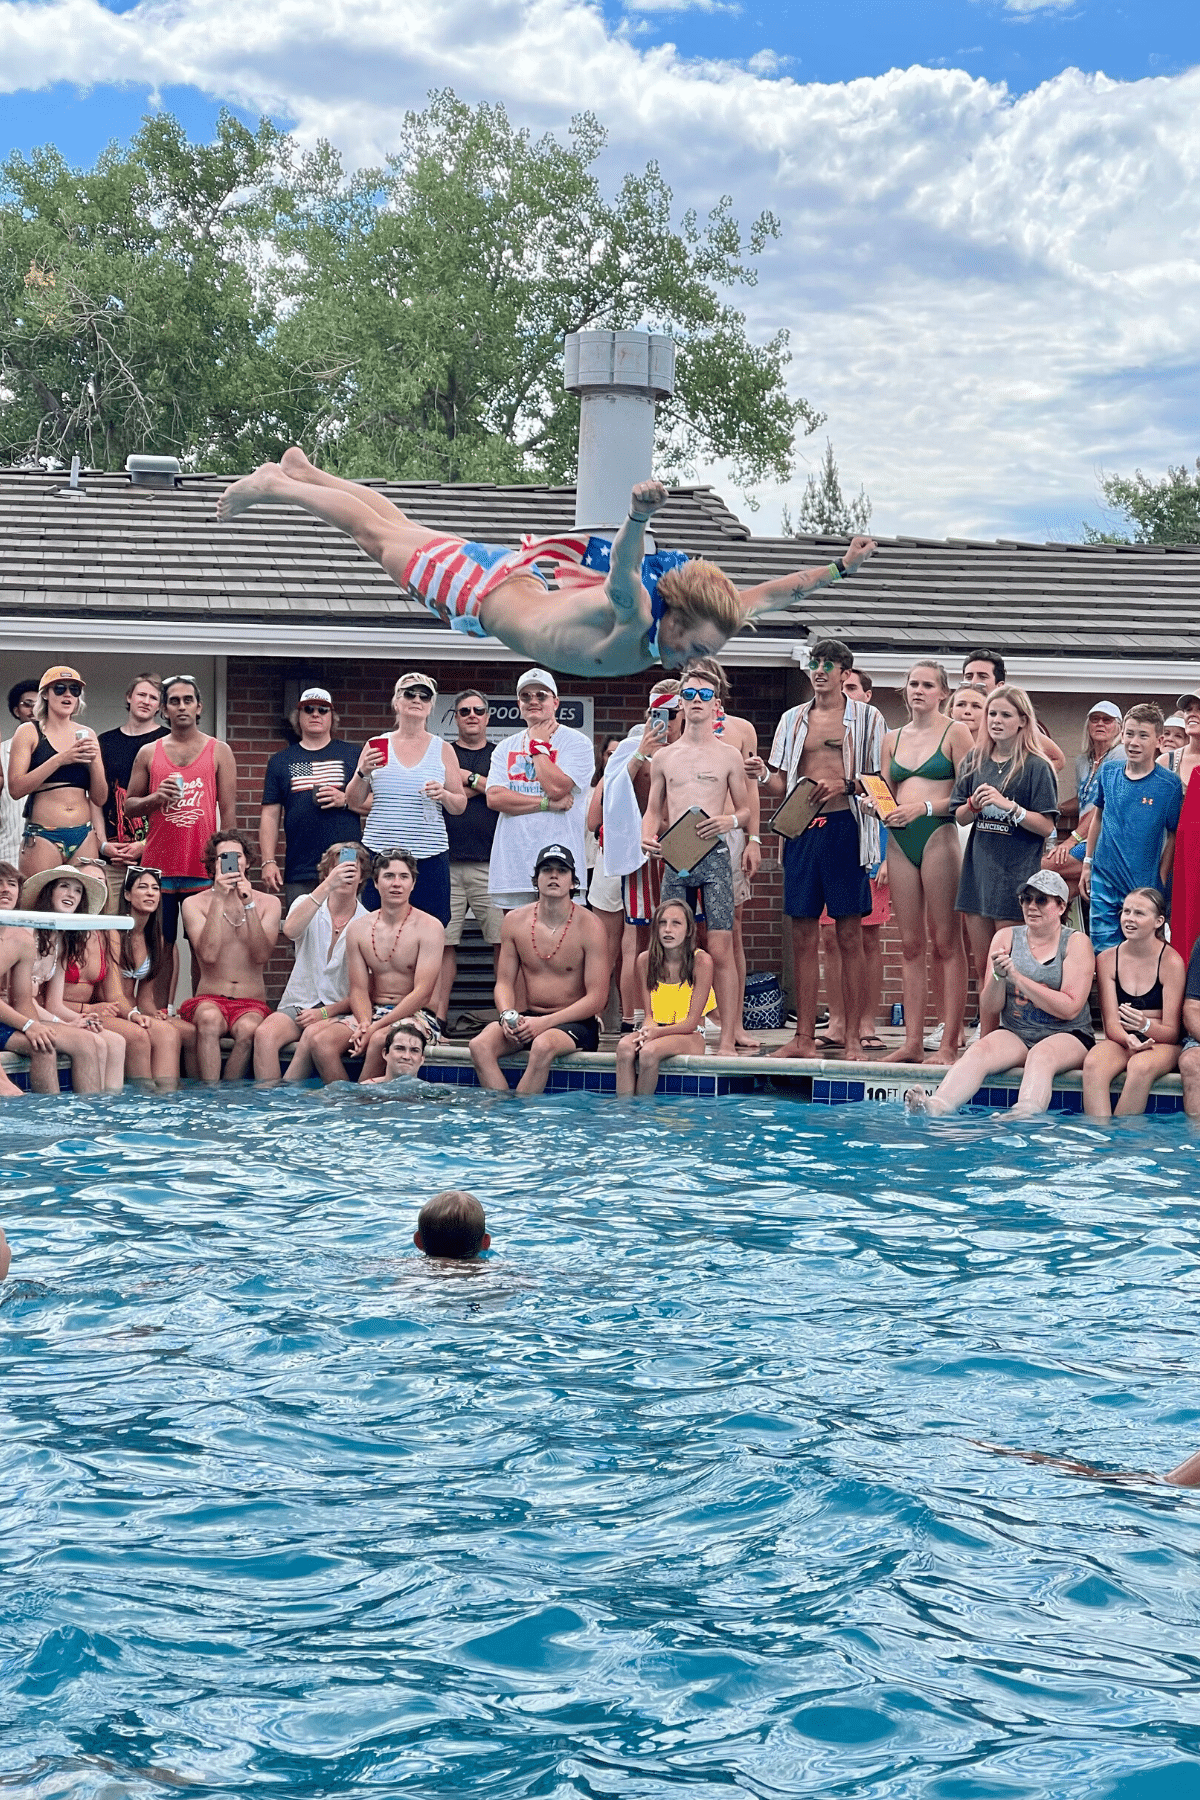 belly flop contest, man dressed in red, white and Blue mid air above pool.